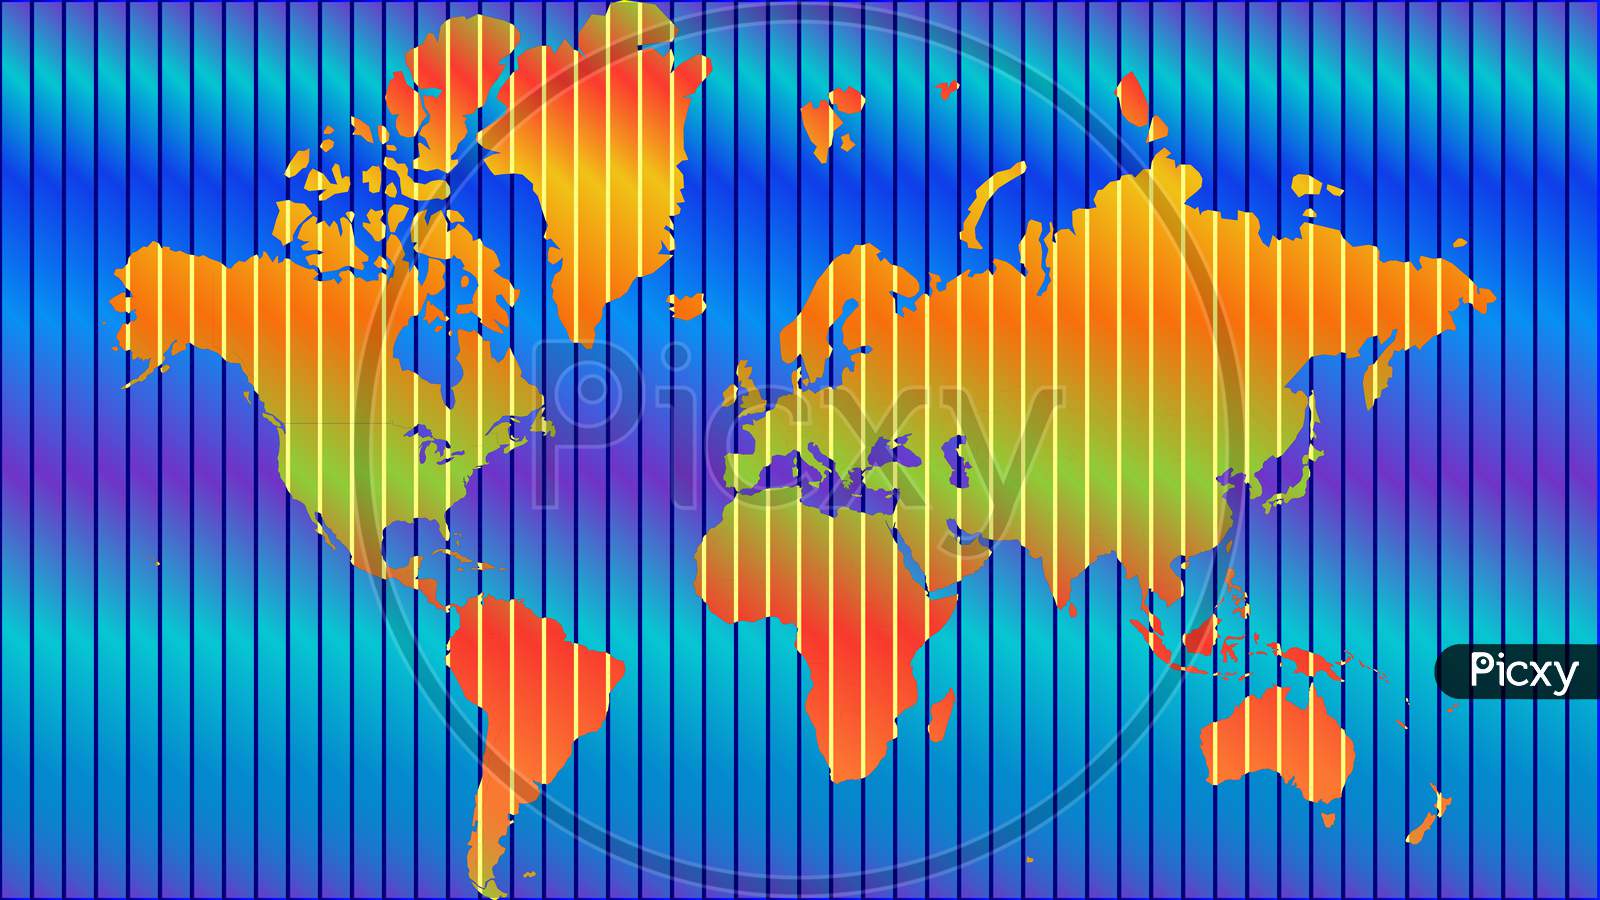 Illustration Of Globe Map With Geometric Shapes Pattern Imposed.